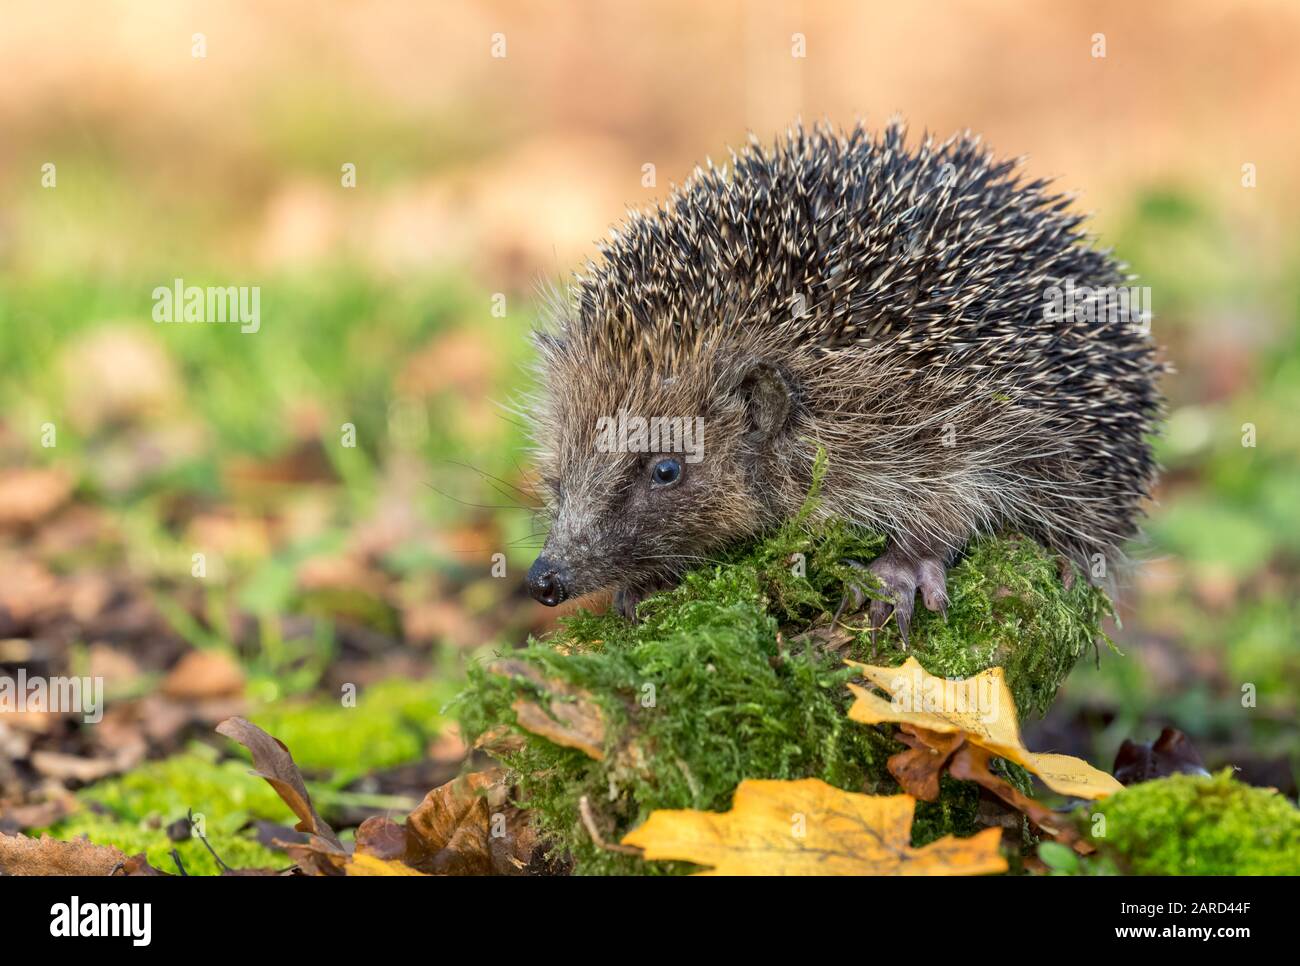 Hedgehog (Latin name: Erinaceus europaeus) Close up of a wild, native  hedgehog in natural woodland habitat,with green moss & Autumn leaves. Landscape Stock Photo